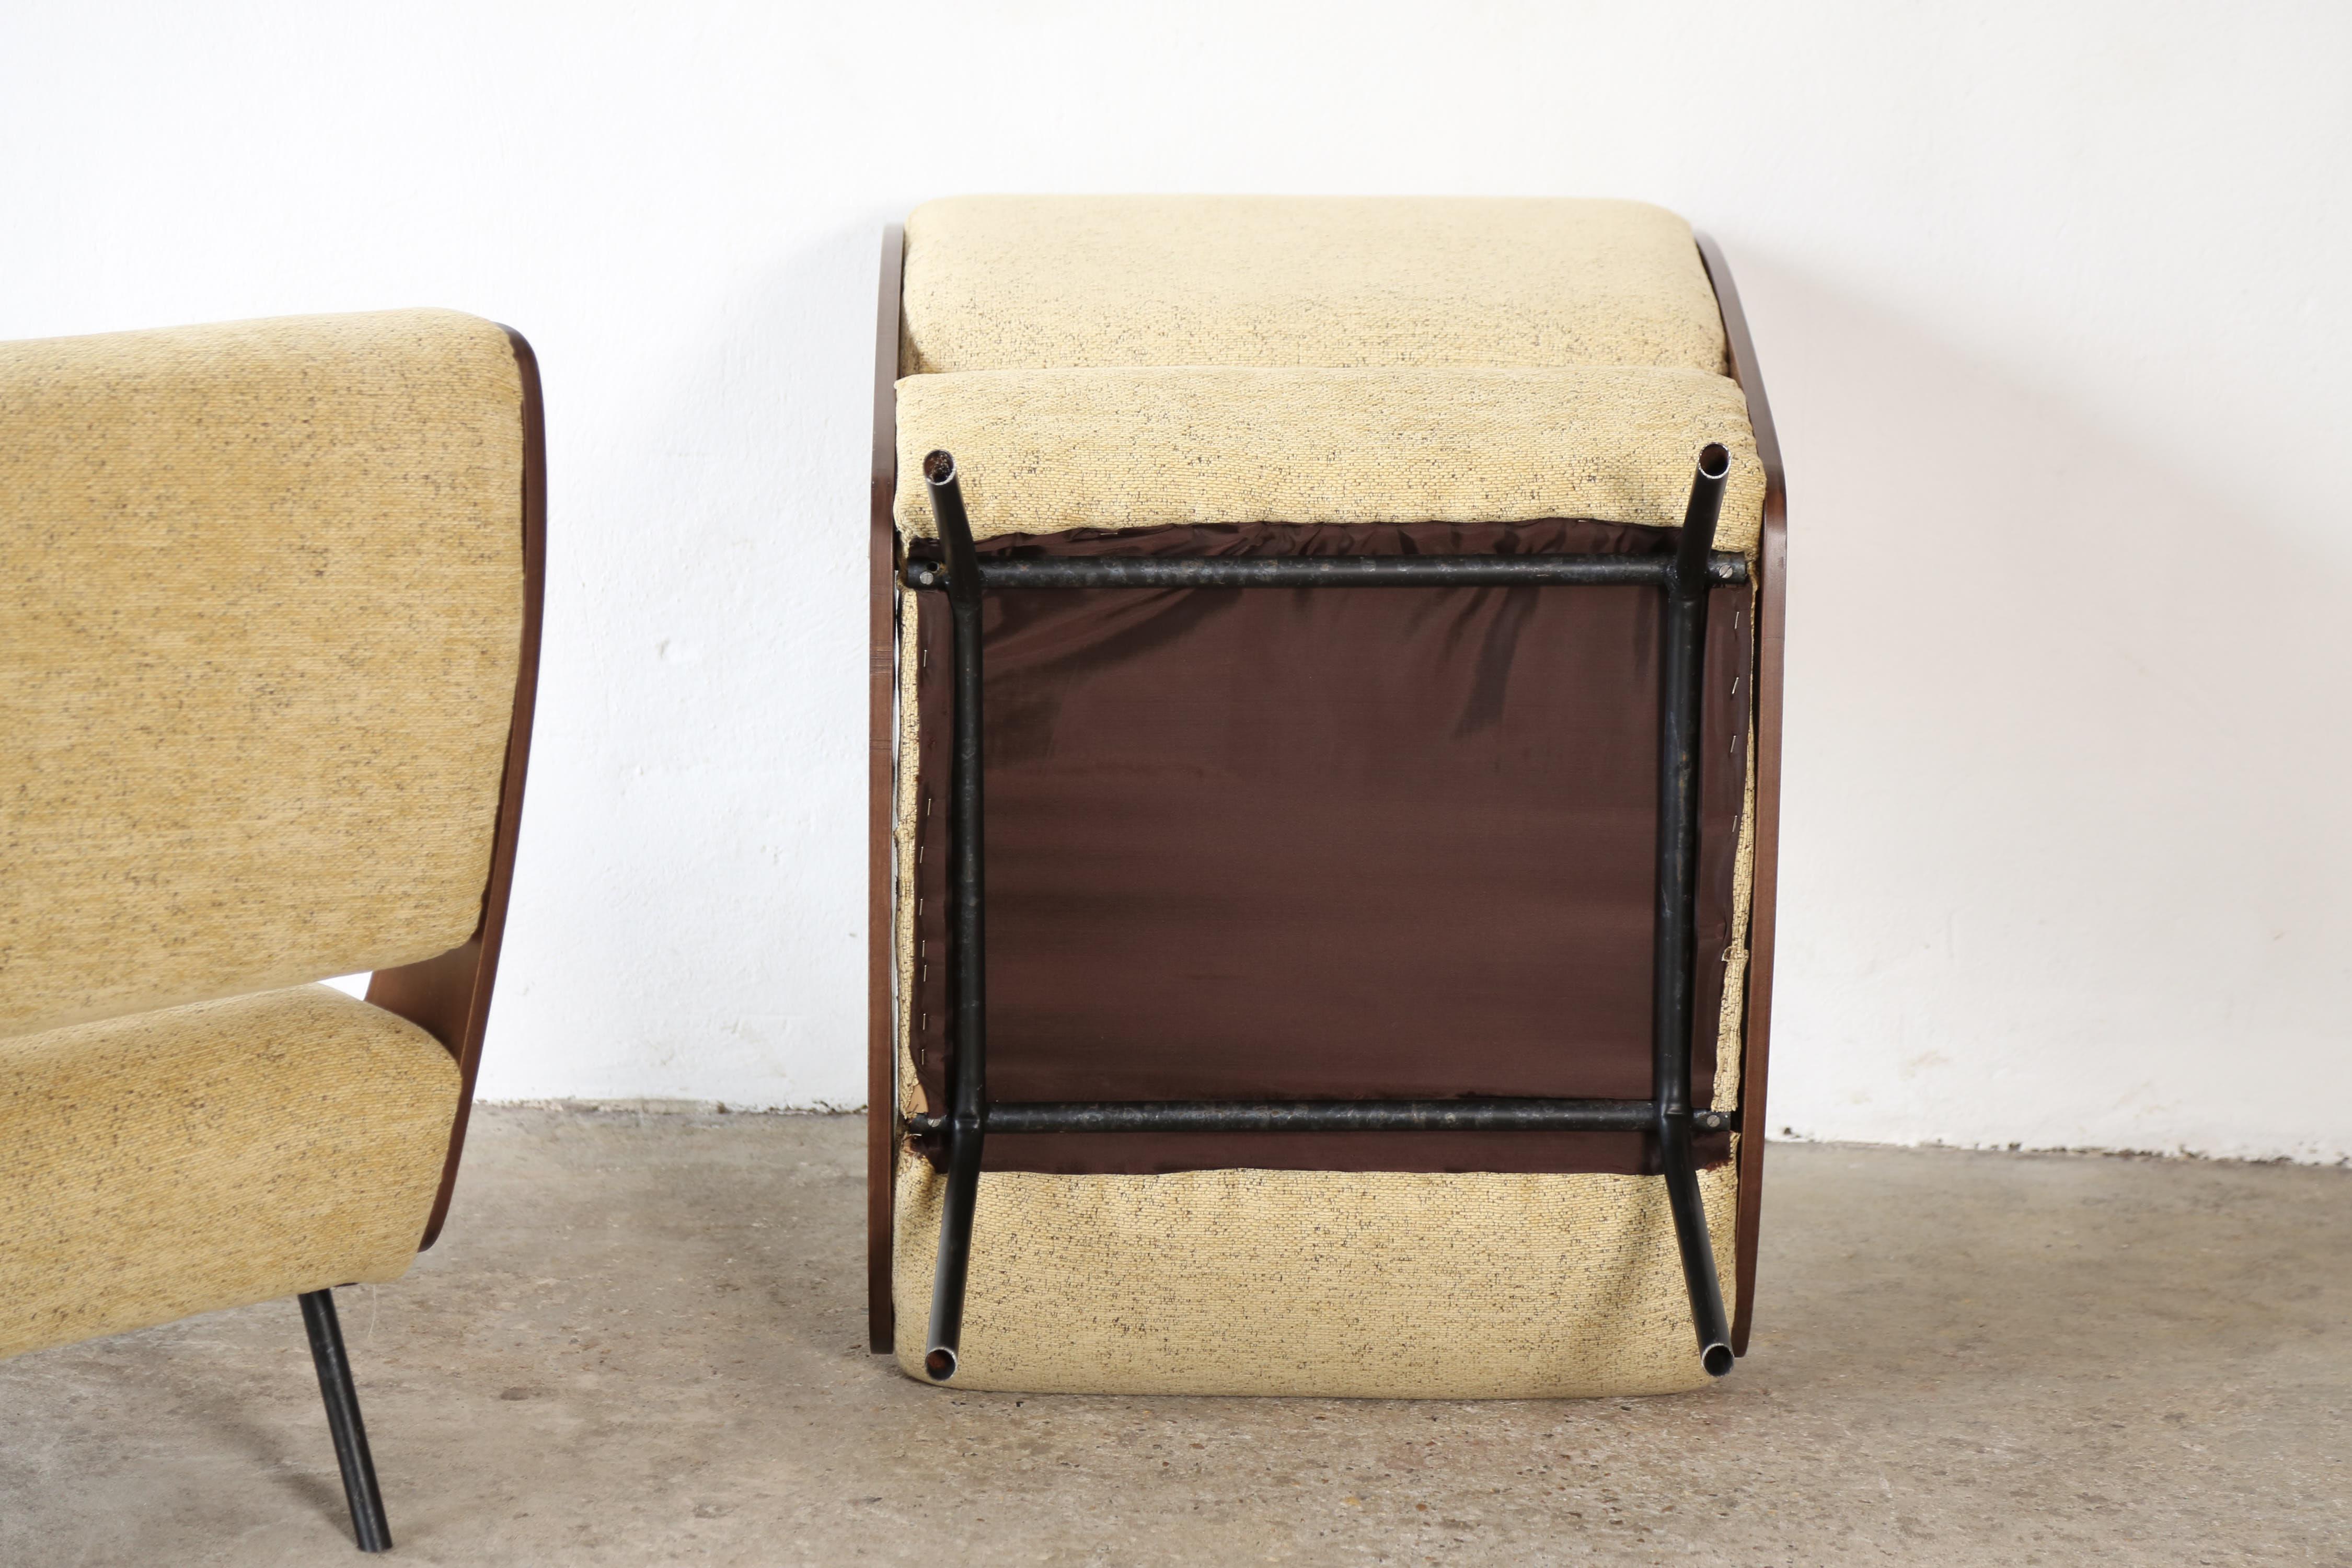 Gianfranco Frattini 836 Lounge Chairs, Cassina, Italy, 1950s For Sale 3